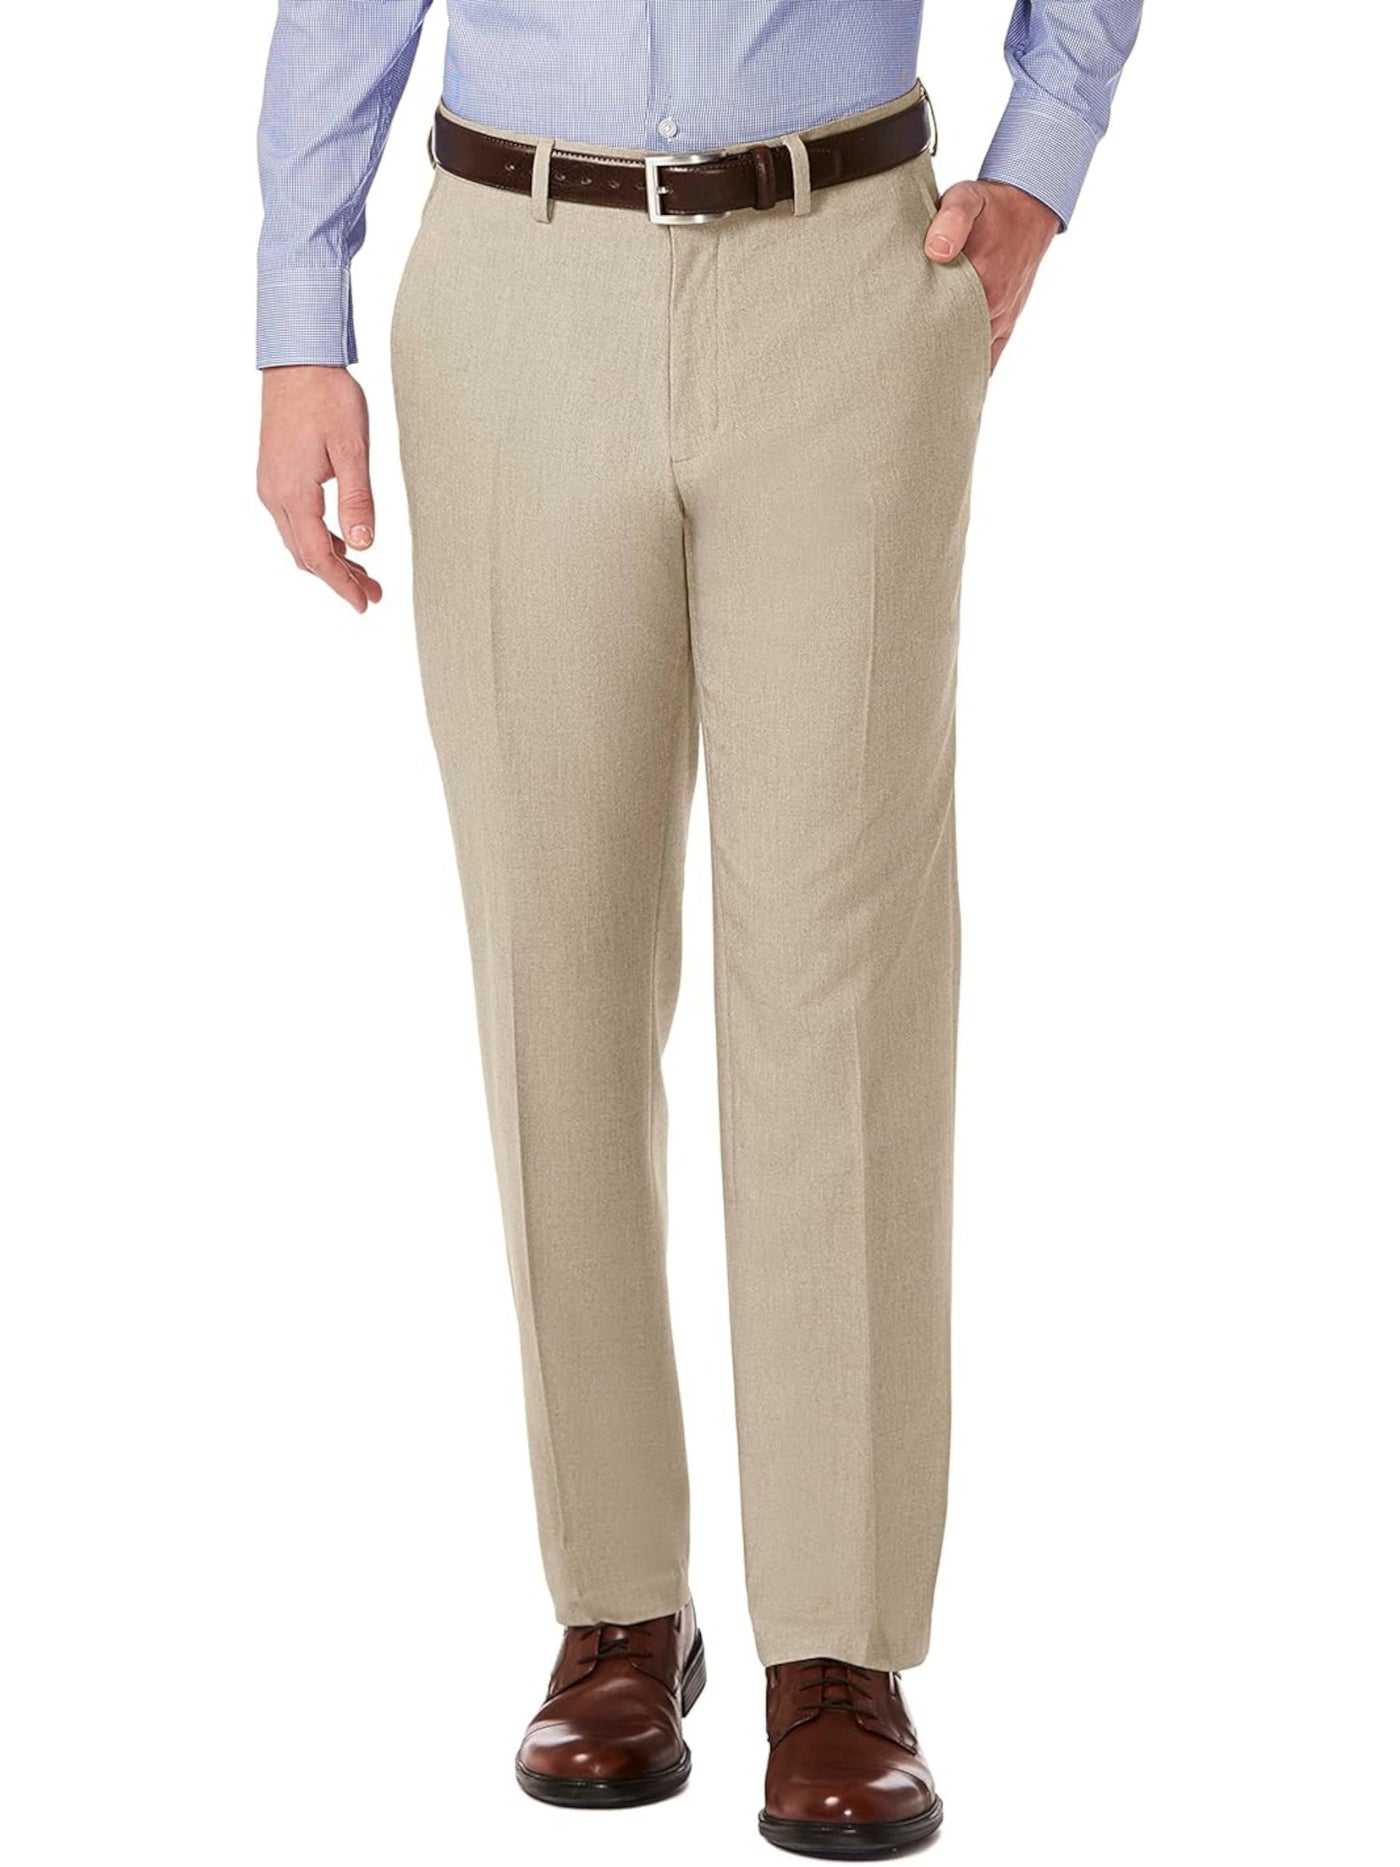 REACTION KENNETH COLE Mens Beige Flat Front, Tapered, Slim Fit Pants 32 X 32